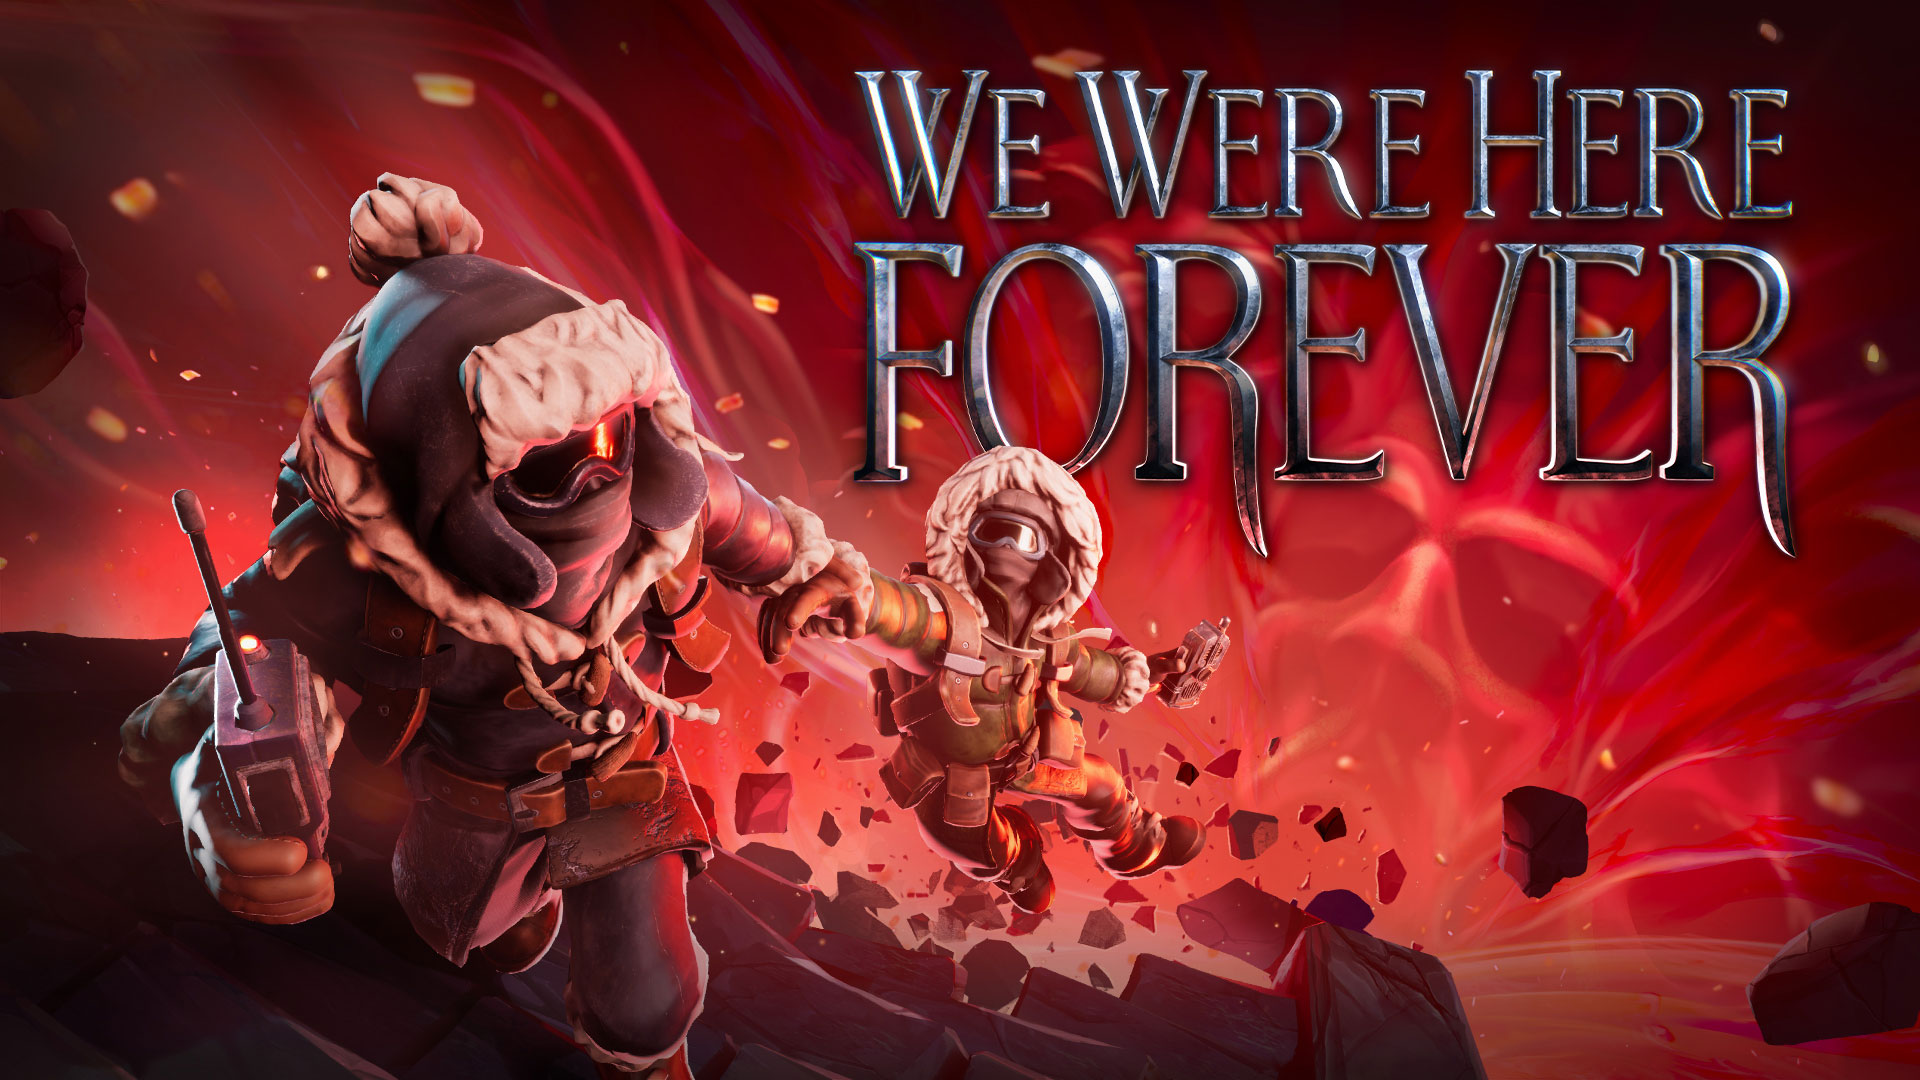 Co-op Puzzle Design for We Were Here Forever